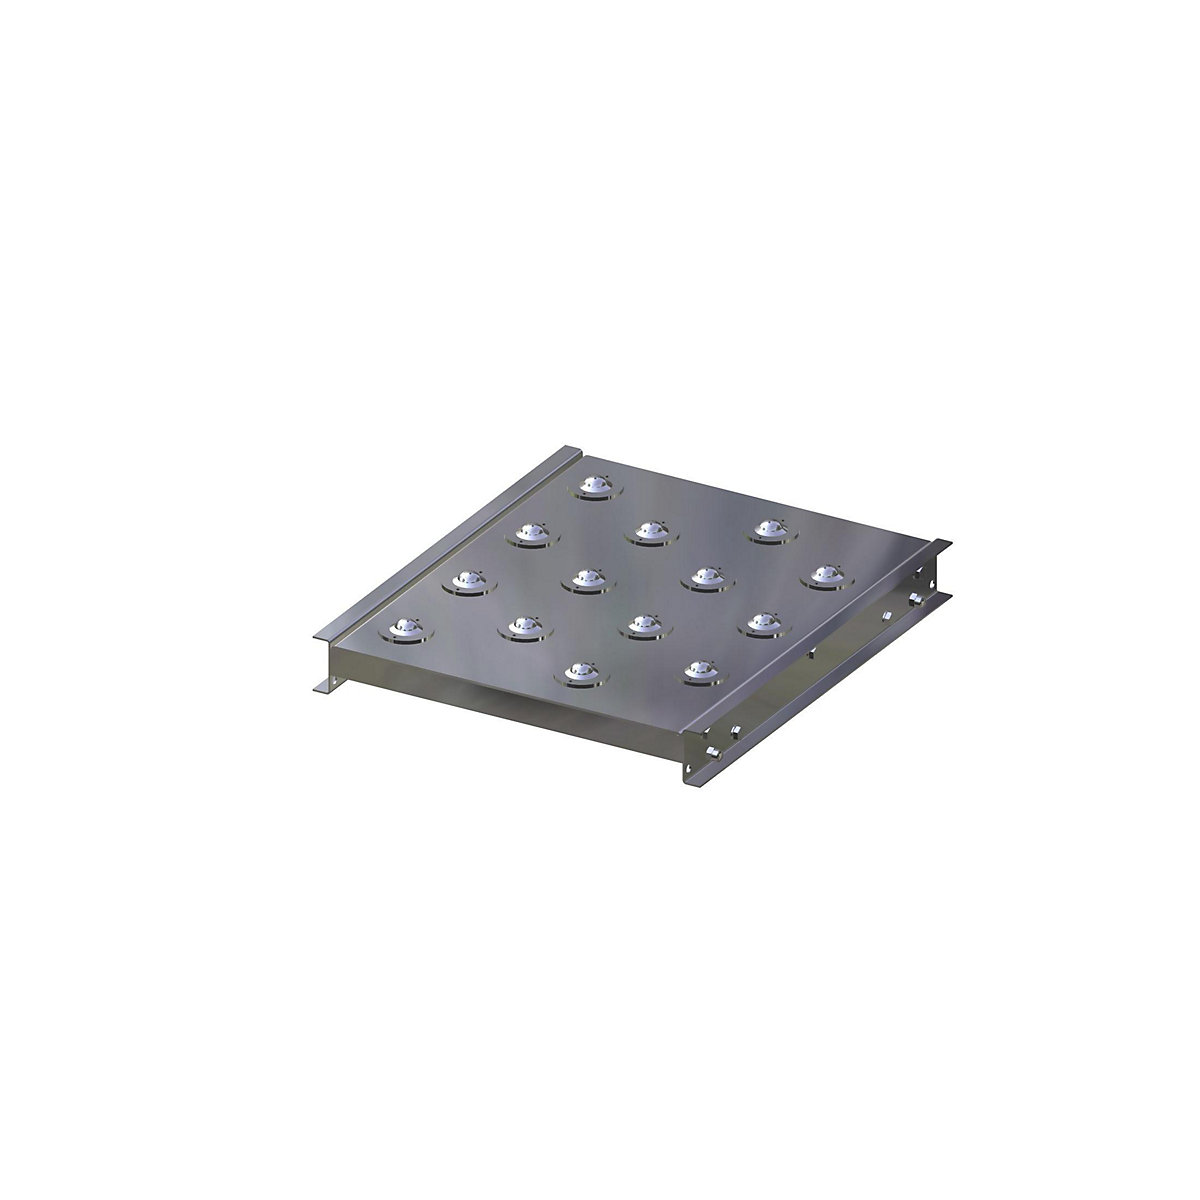 Gura – Ball unit table, track width 400 mm, length 500 mm, division 125 mm